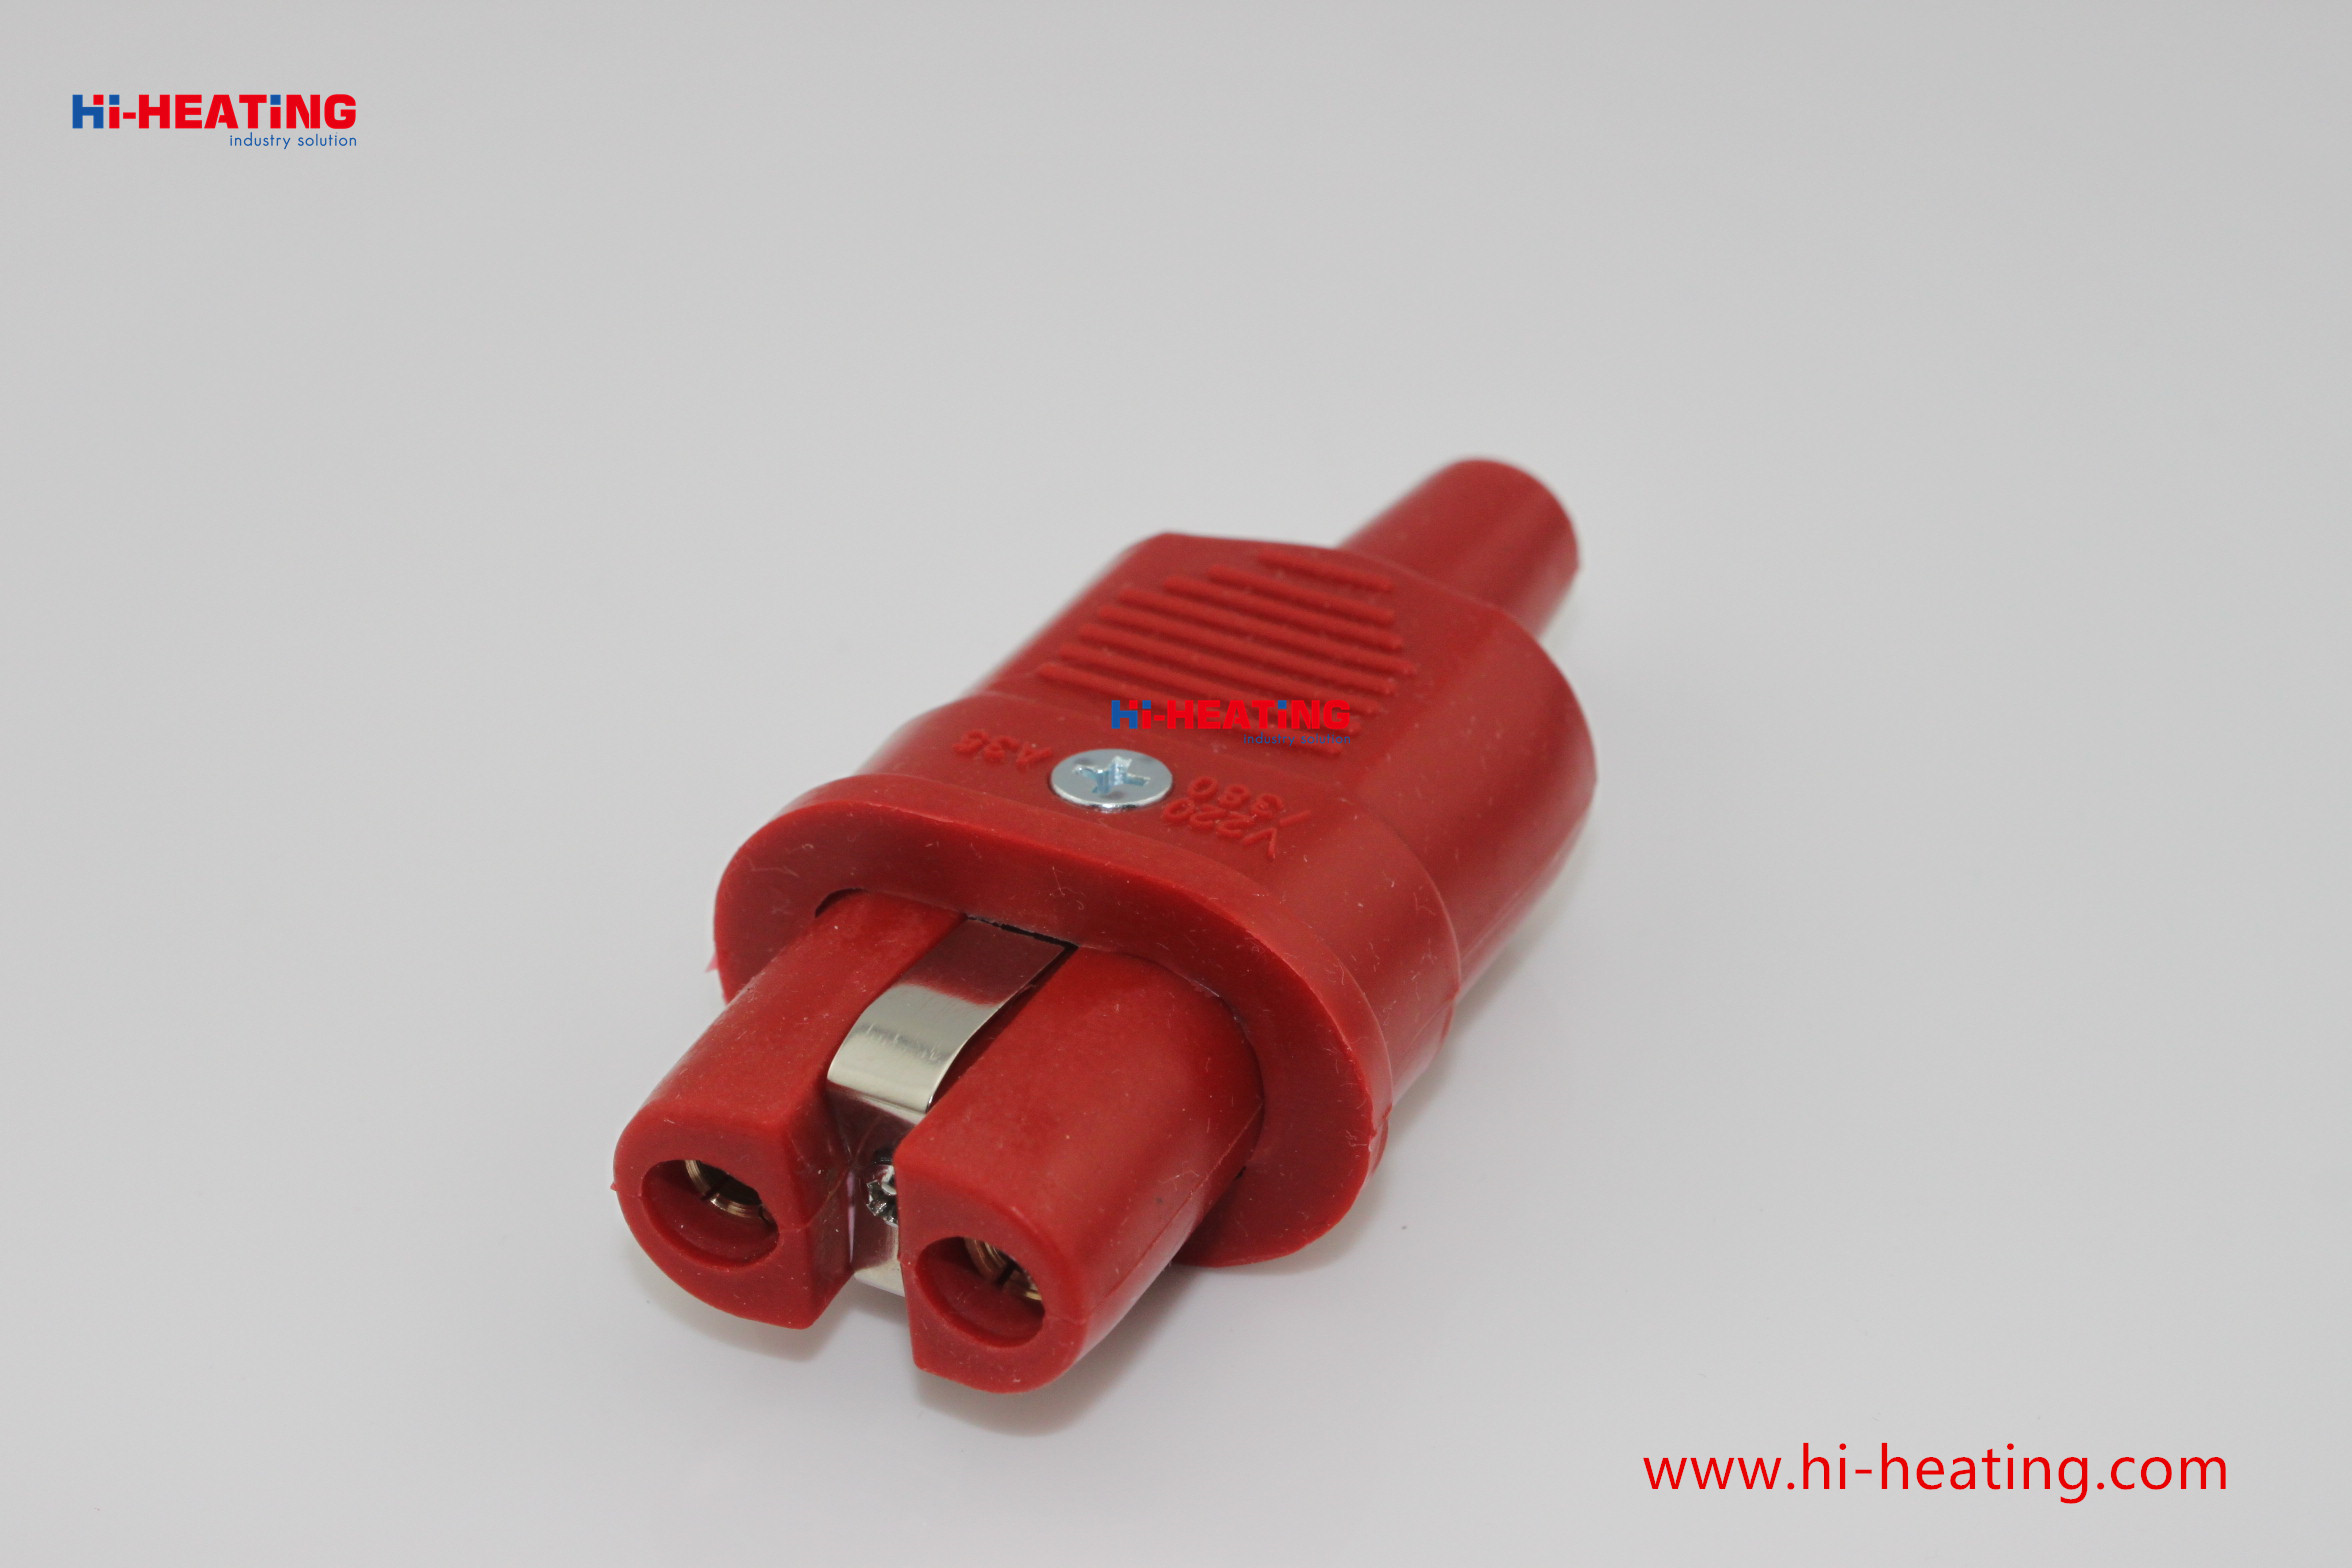 2022 years hot sales high temperature silicon plug good quality